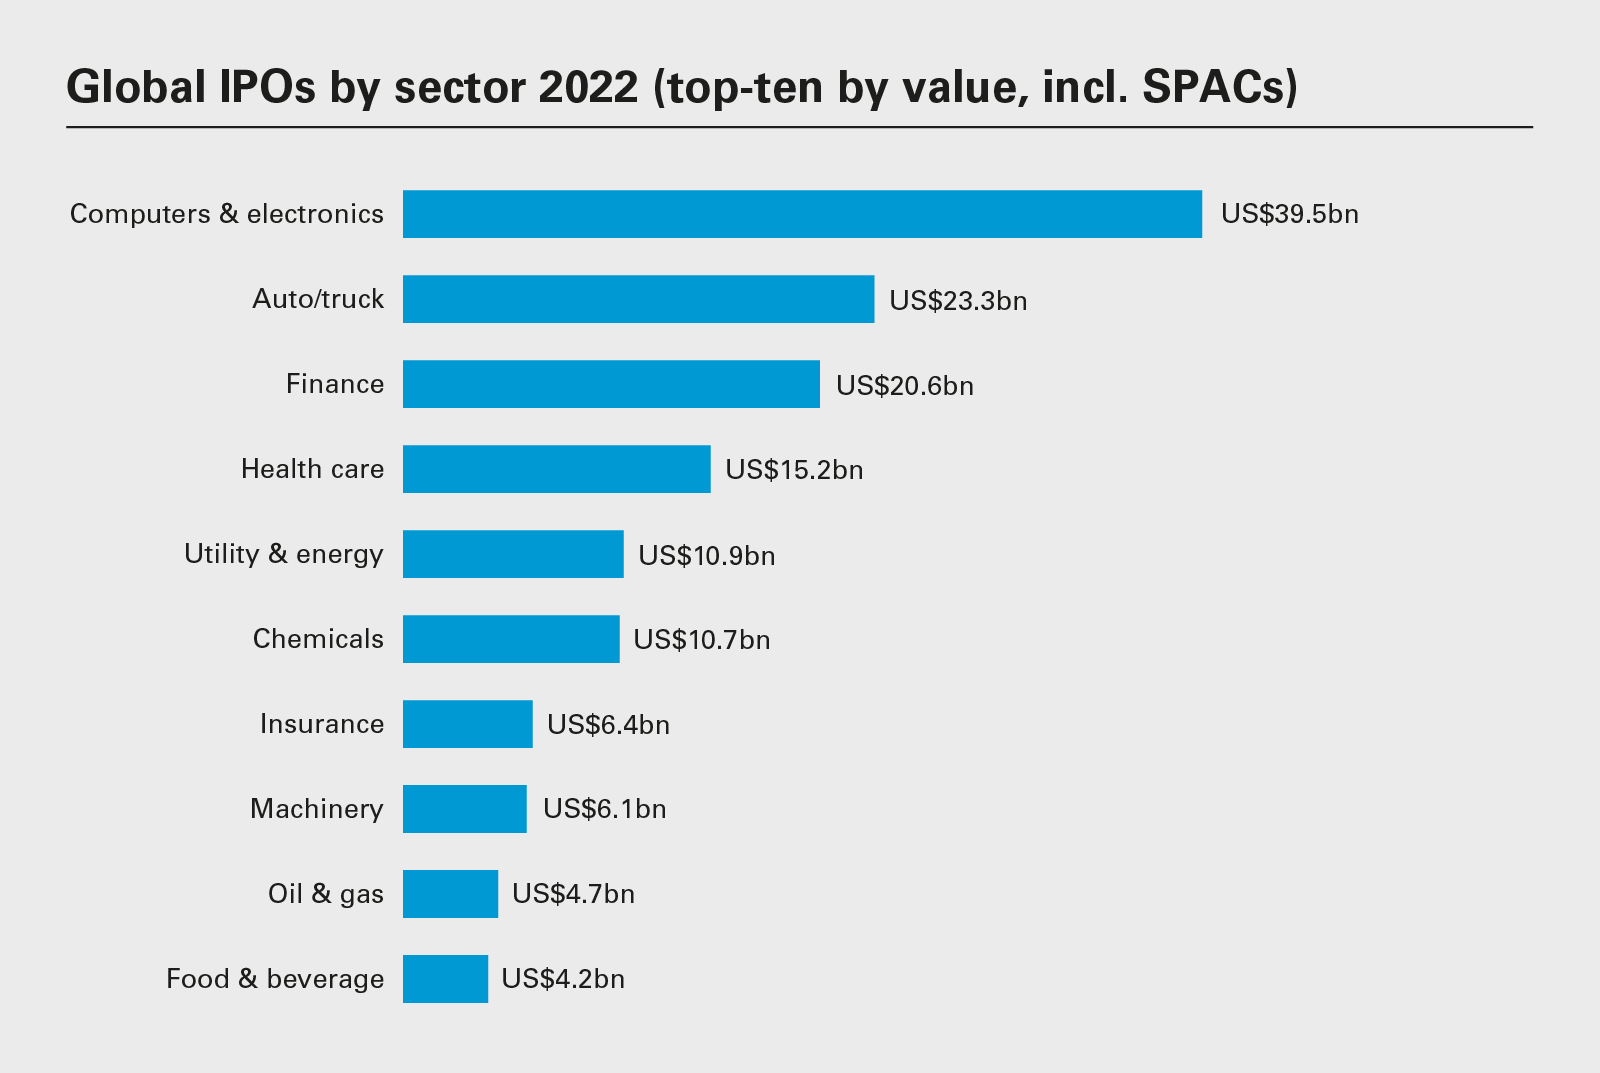 Global IPOs by sector 2022 (top-ten by volume, incl. SPACs)